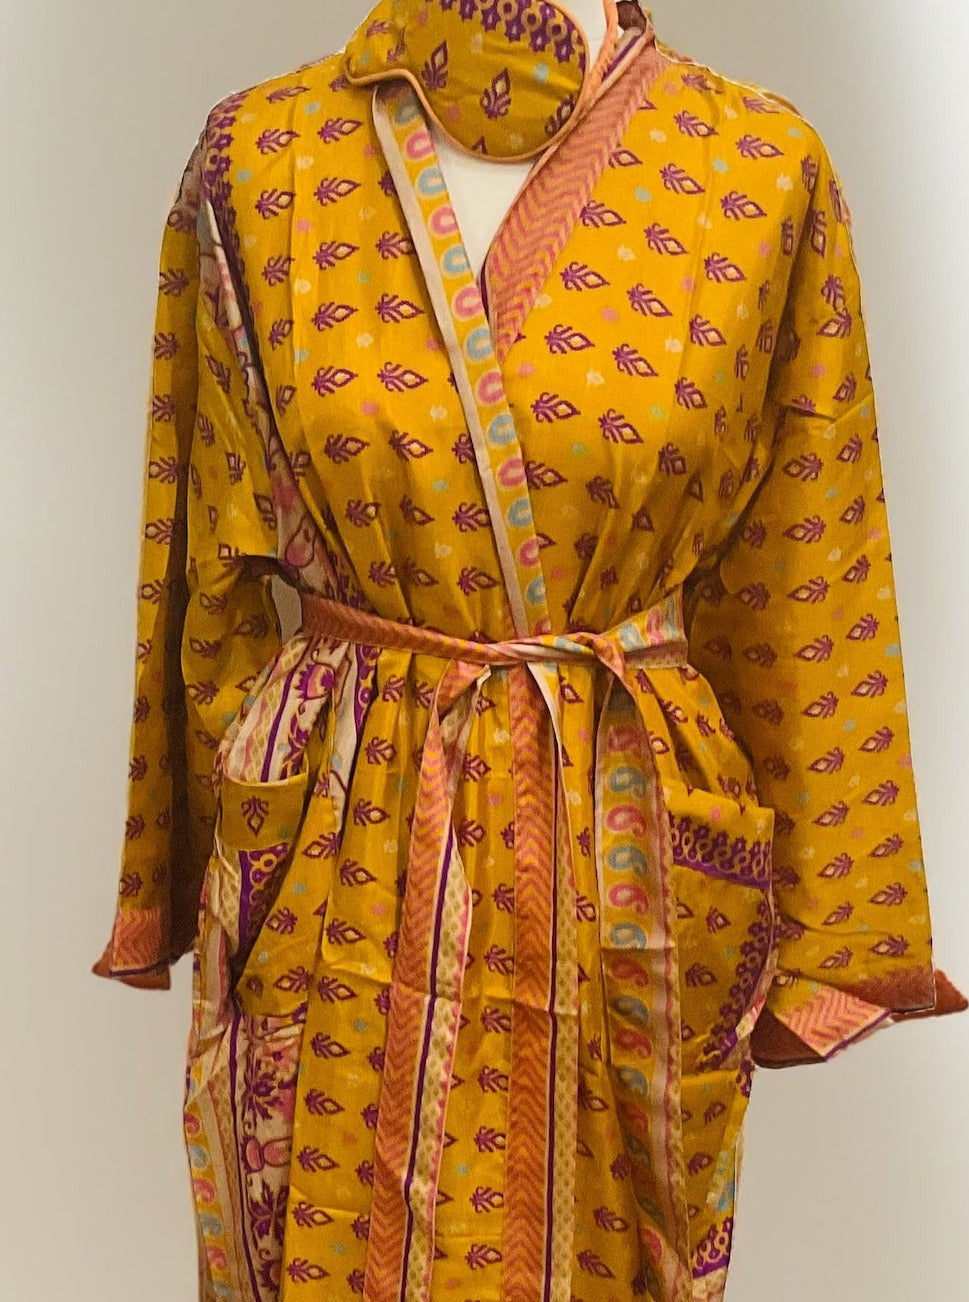 Yellow Recycled Sari Dressing Gown Second Nature Online